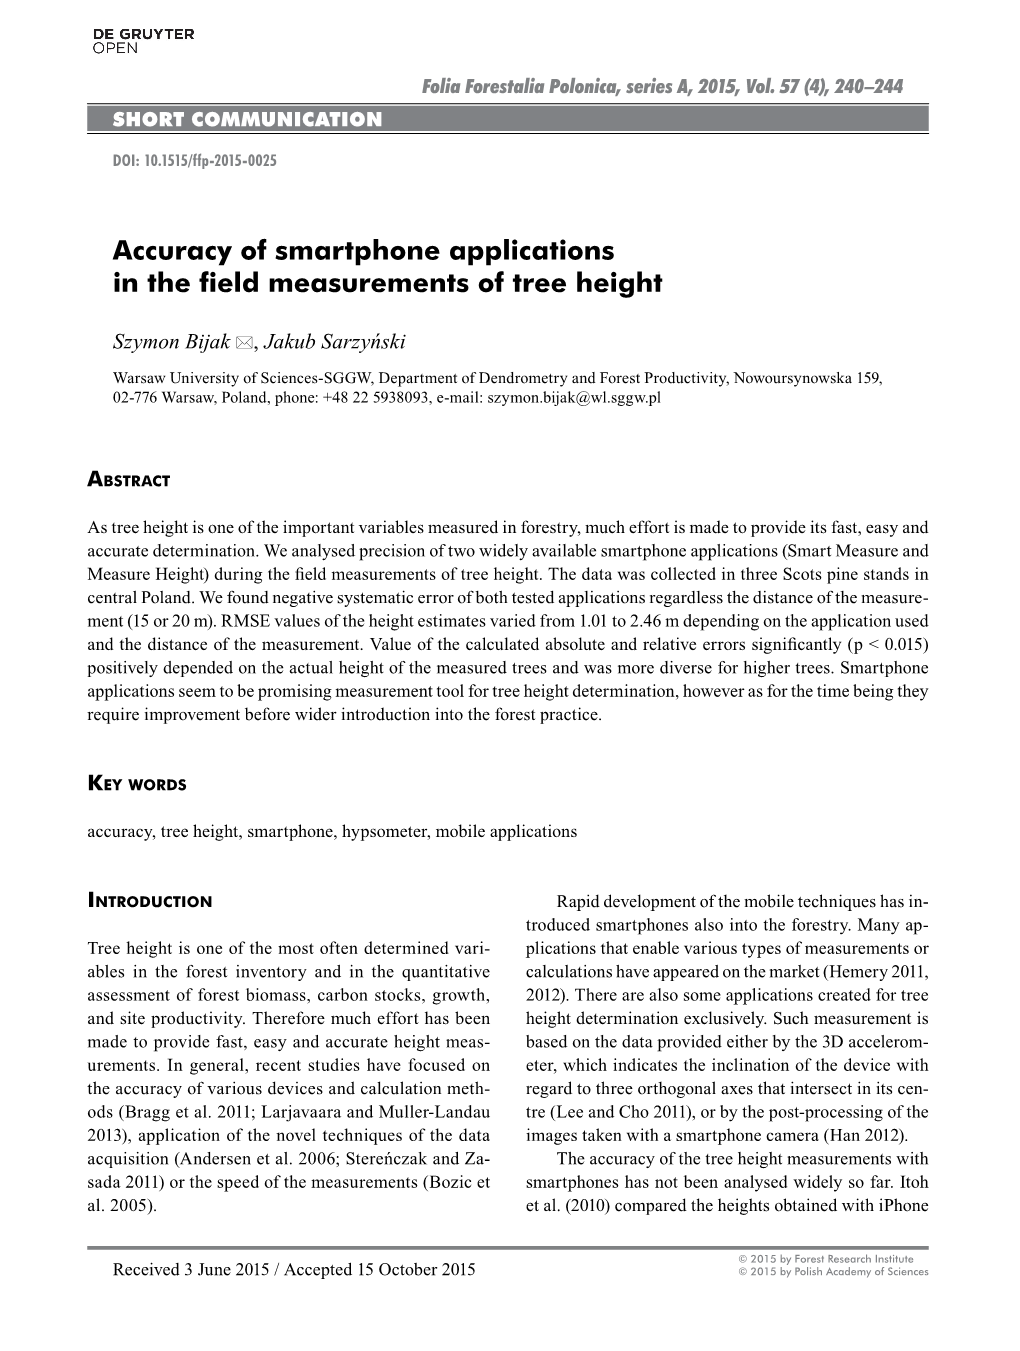 Accuracy of Smartphone Applications in the Field Measurements of Tree Height